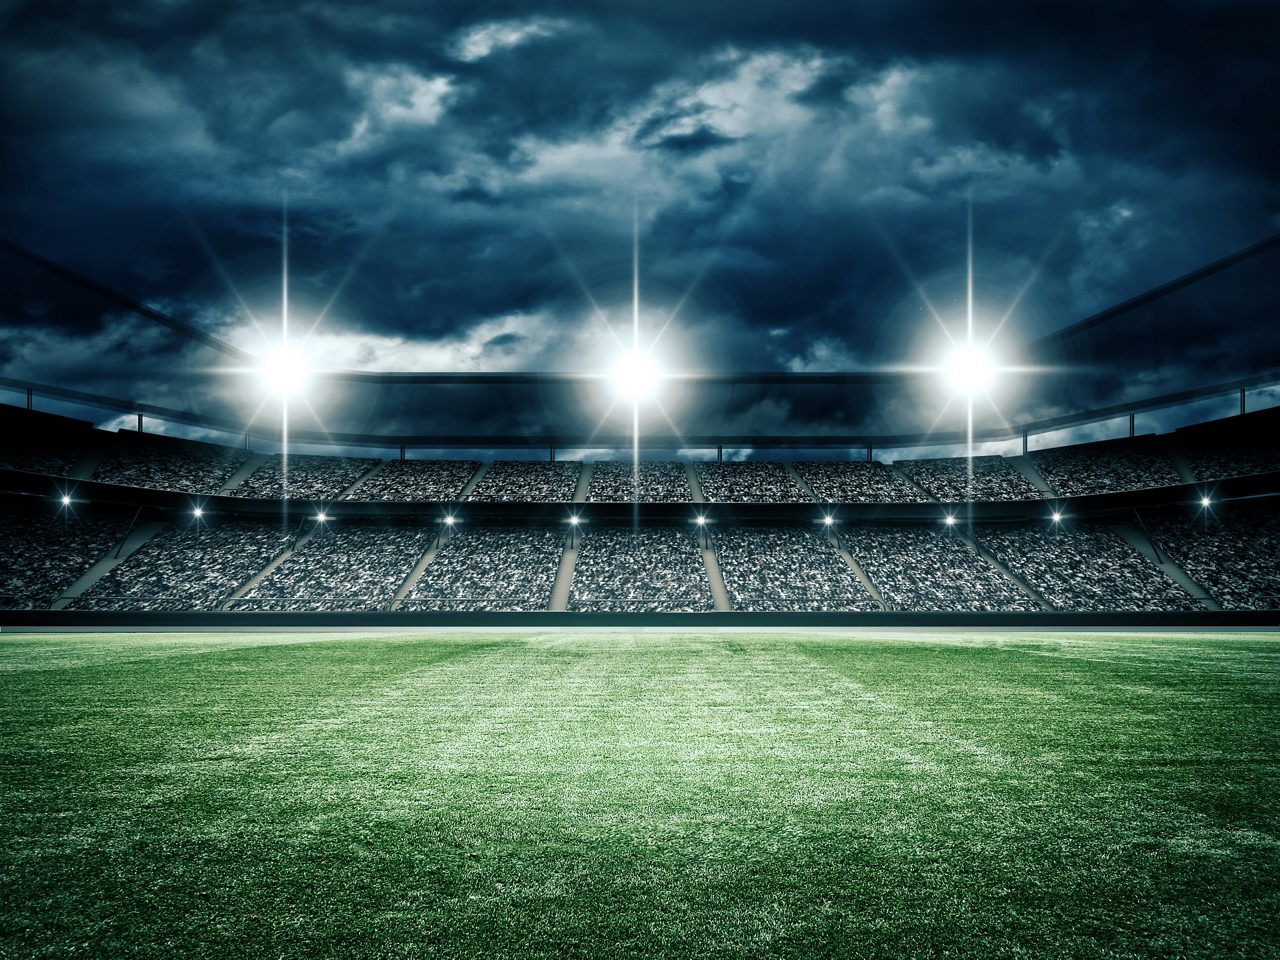 View from the ground looking up at the lights of a stadium on a cloudy night.